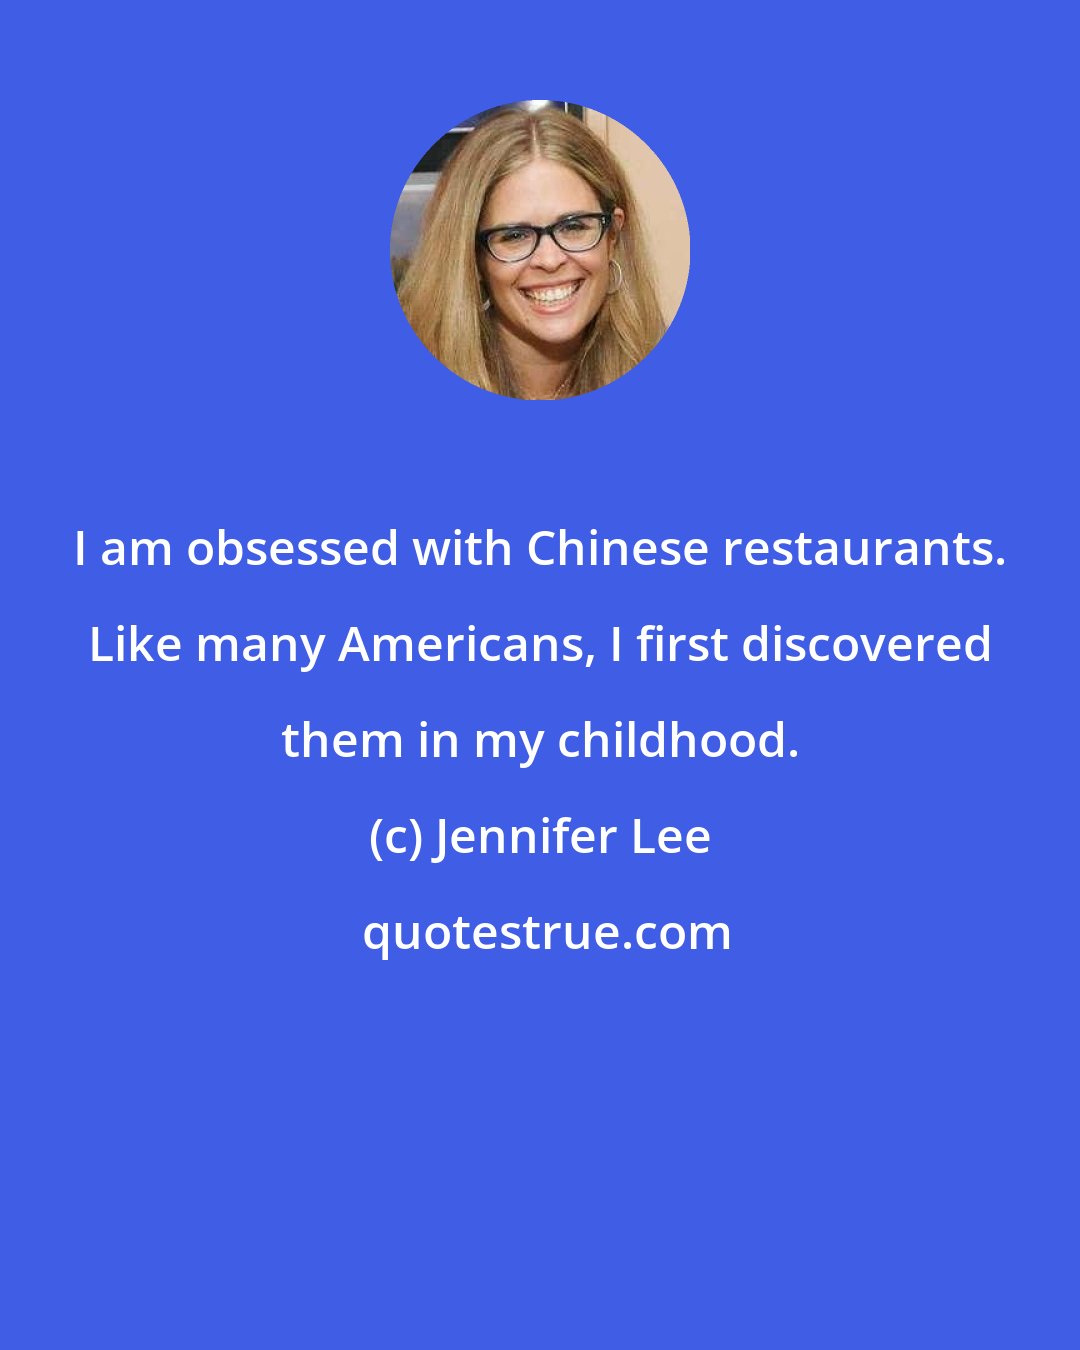 Jennifer Lee: I am obsessed with Chinese restaurants. Like many Americans, I first discovered them in my childhood.